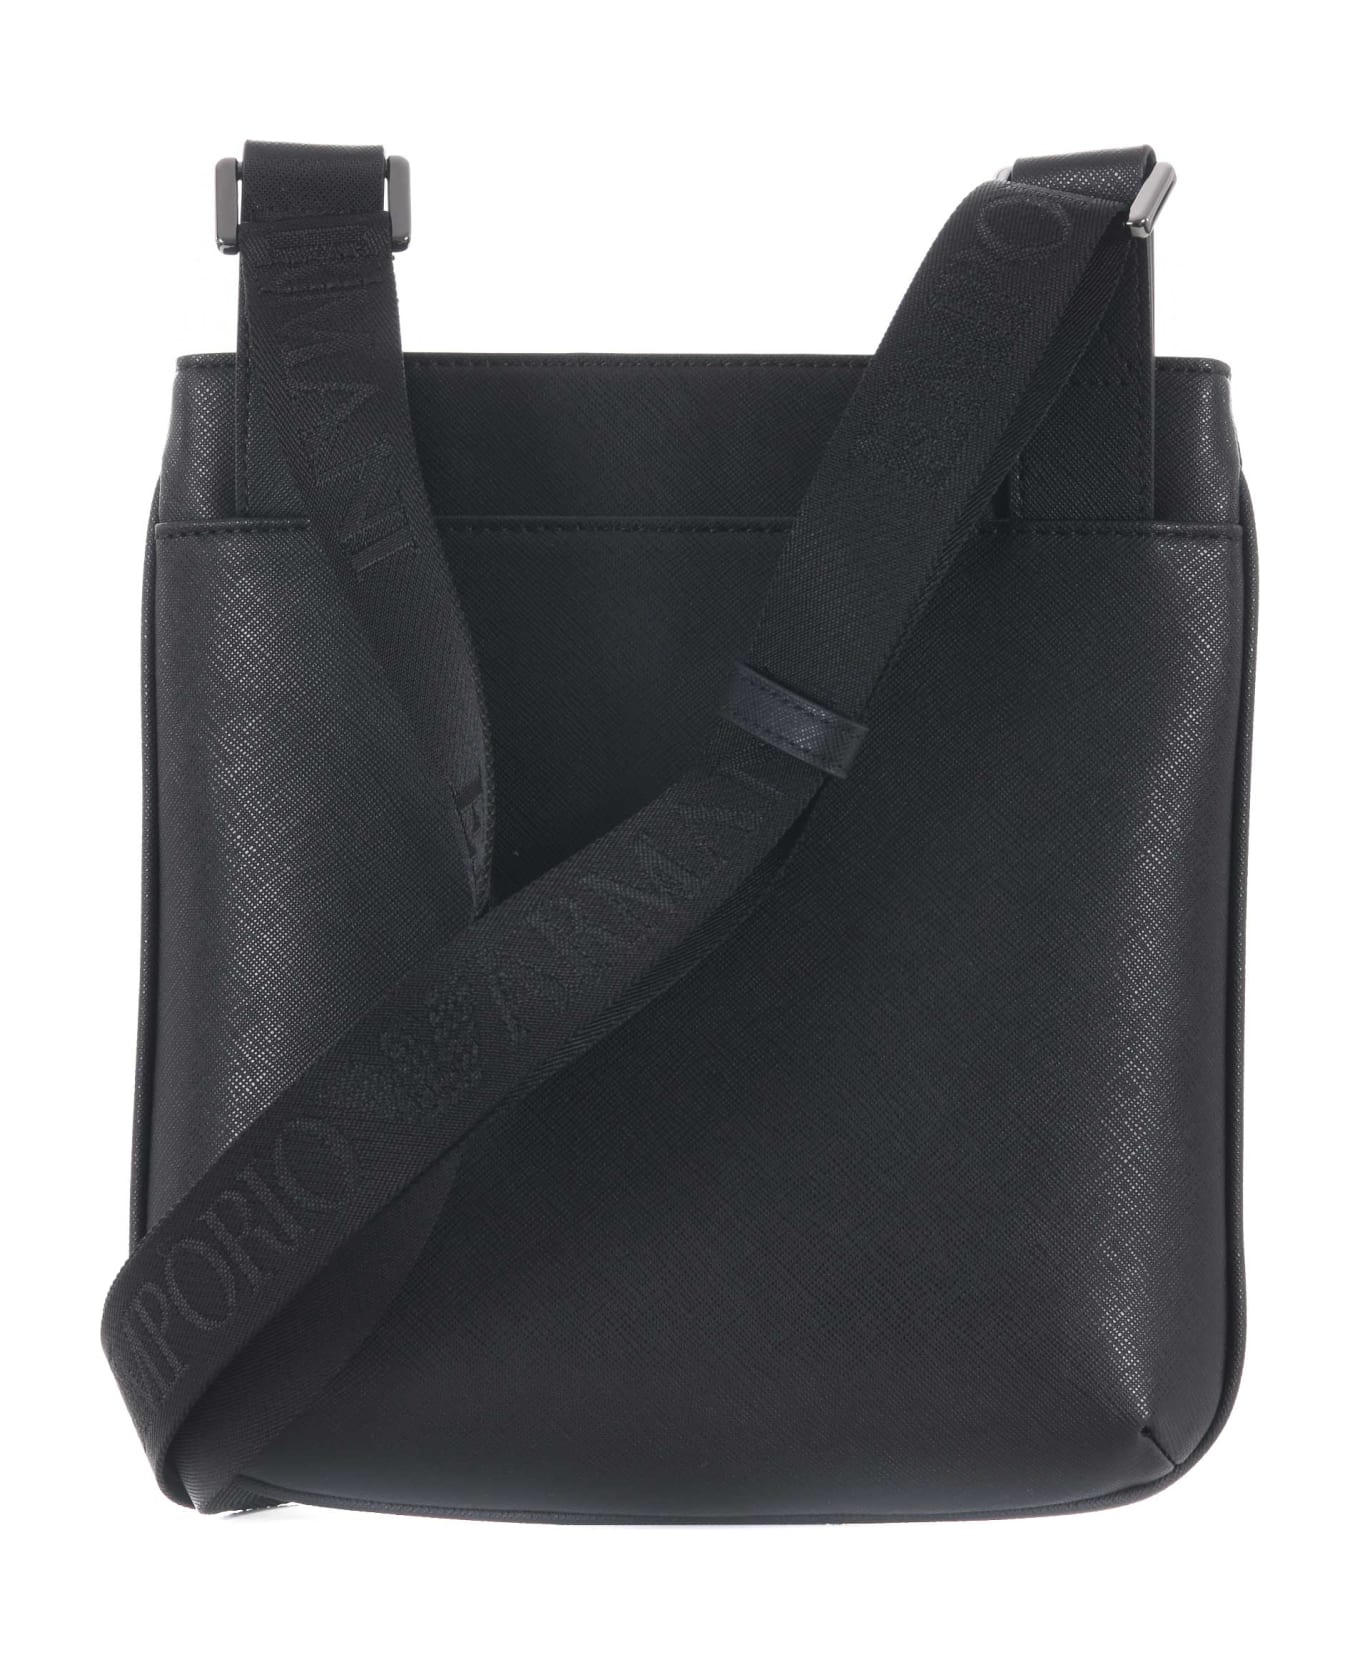 Emporio Armani Shoulder Bag From The 'sustainable' Collection - Black ショルダーバッグ